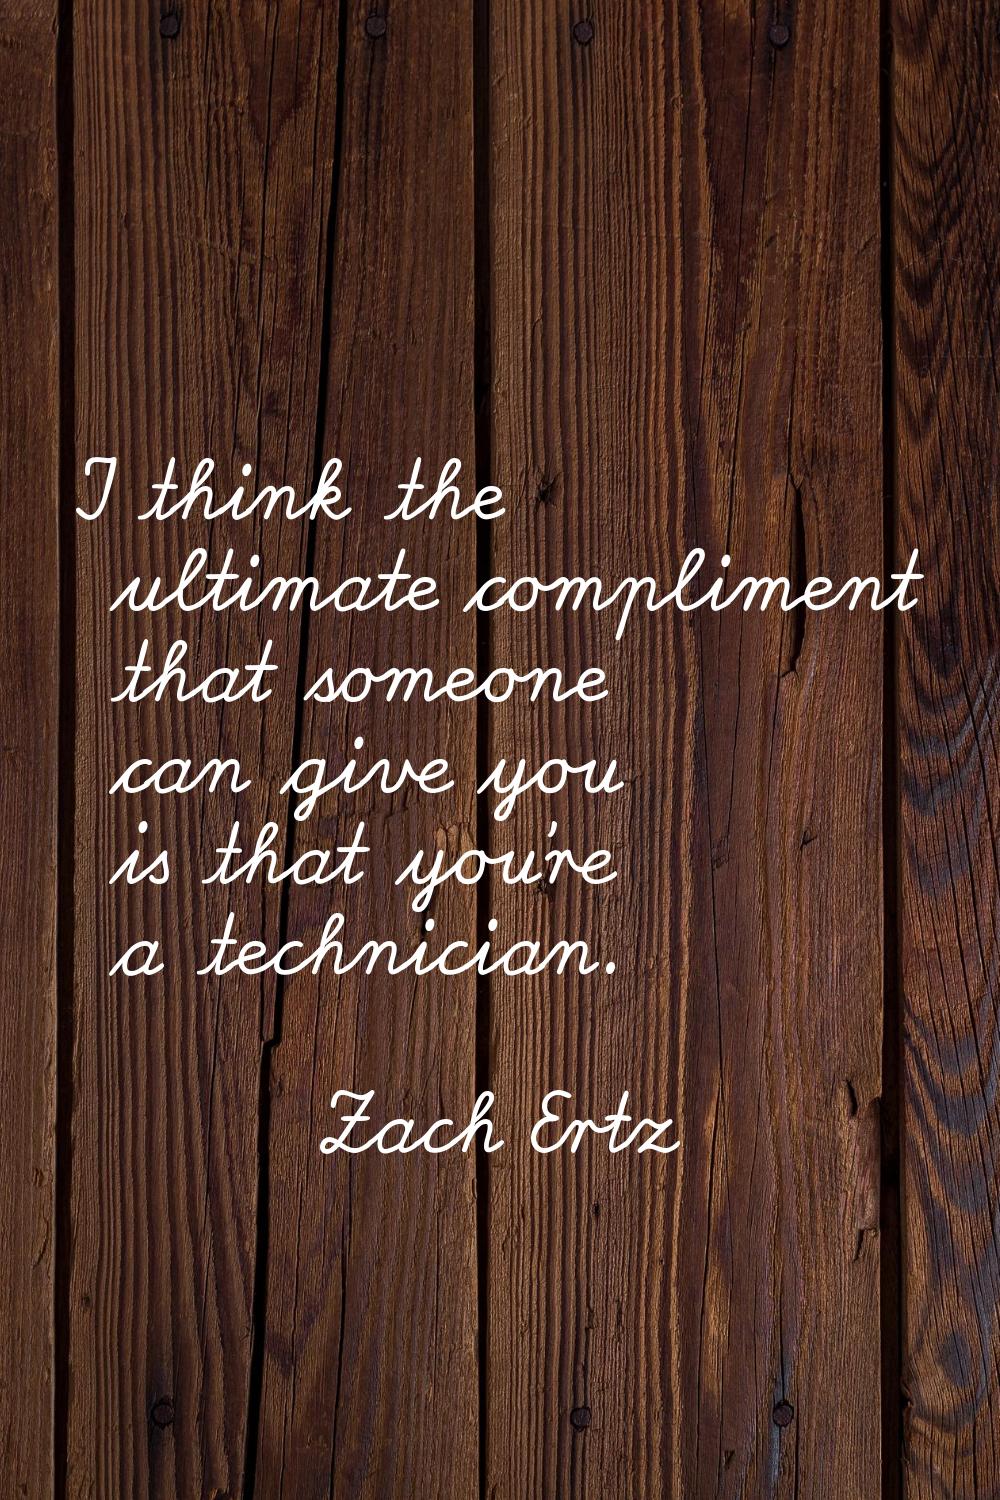 I think the ultimate compliment that someone can give you is that you're a technician.